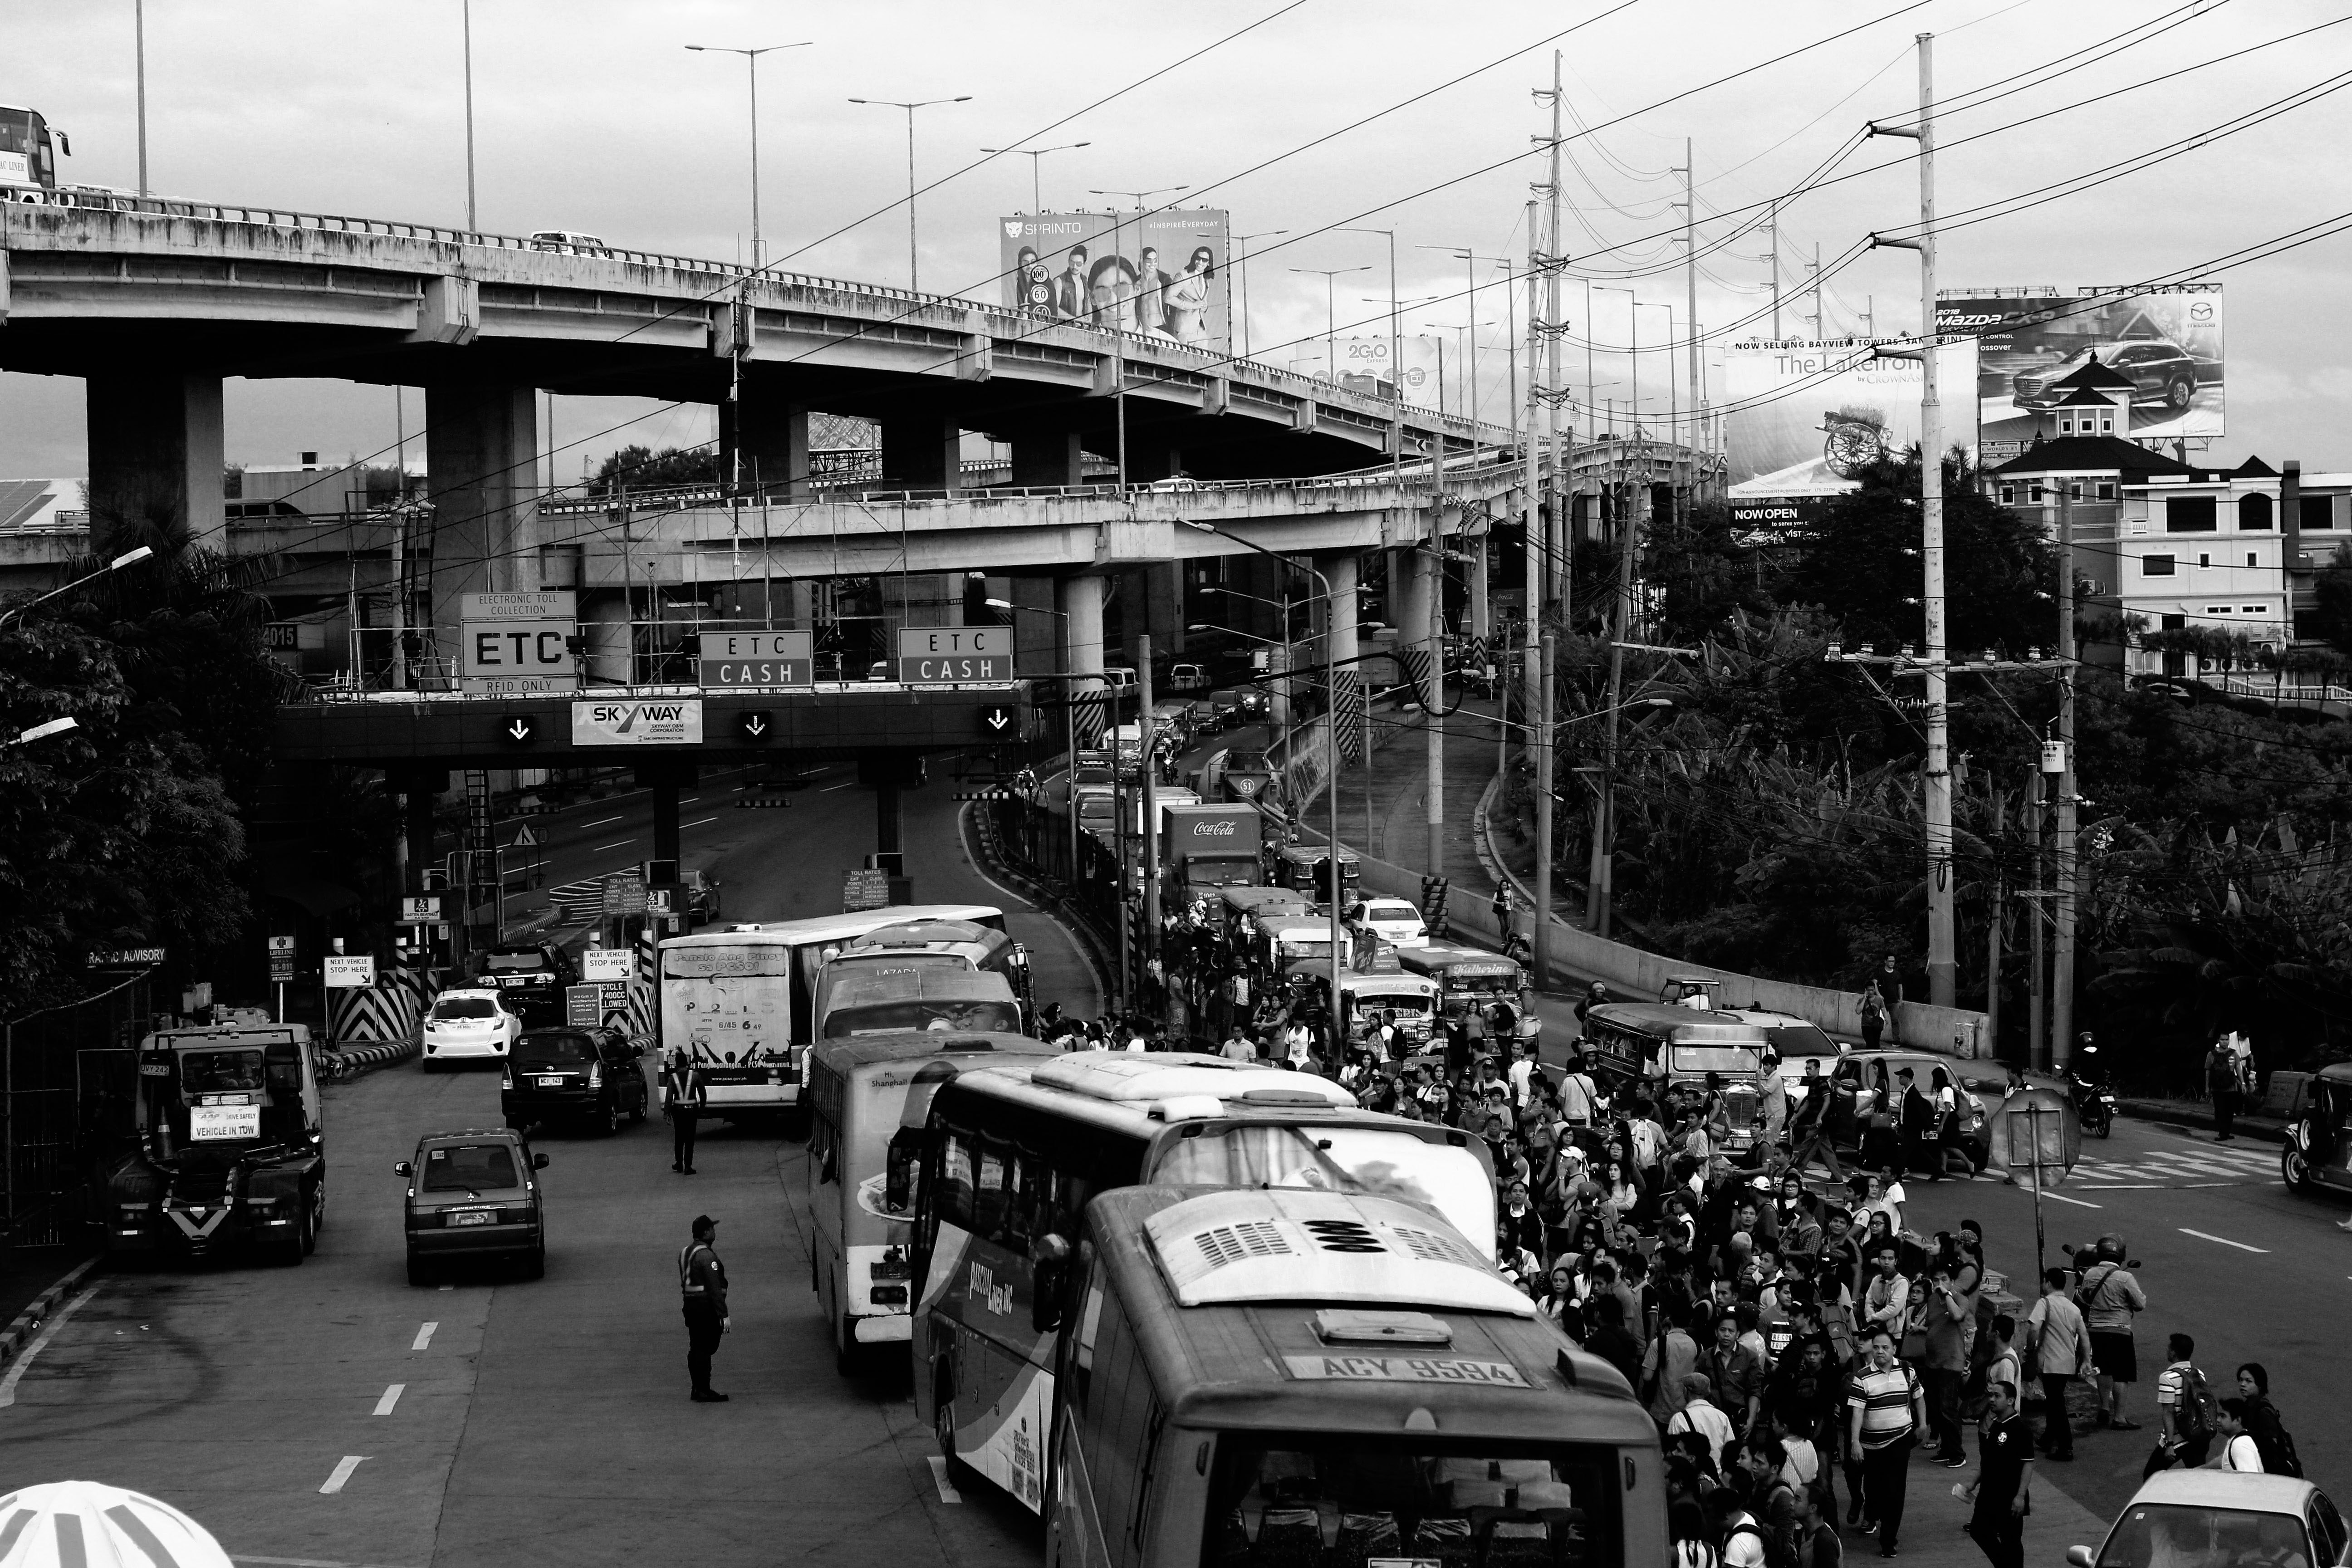 Jammed traffic in gray scale photography